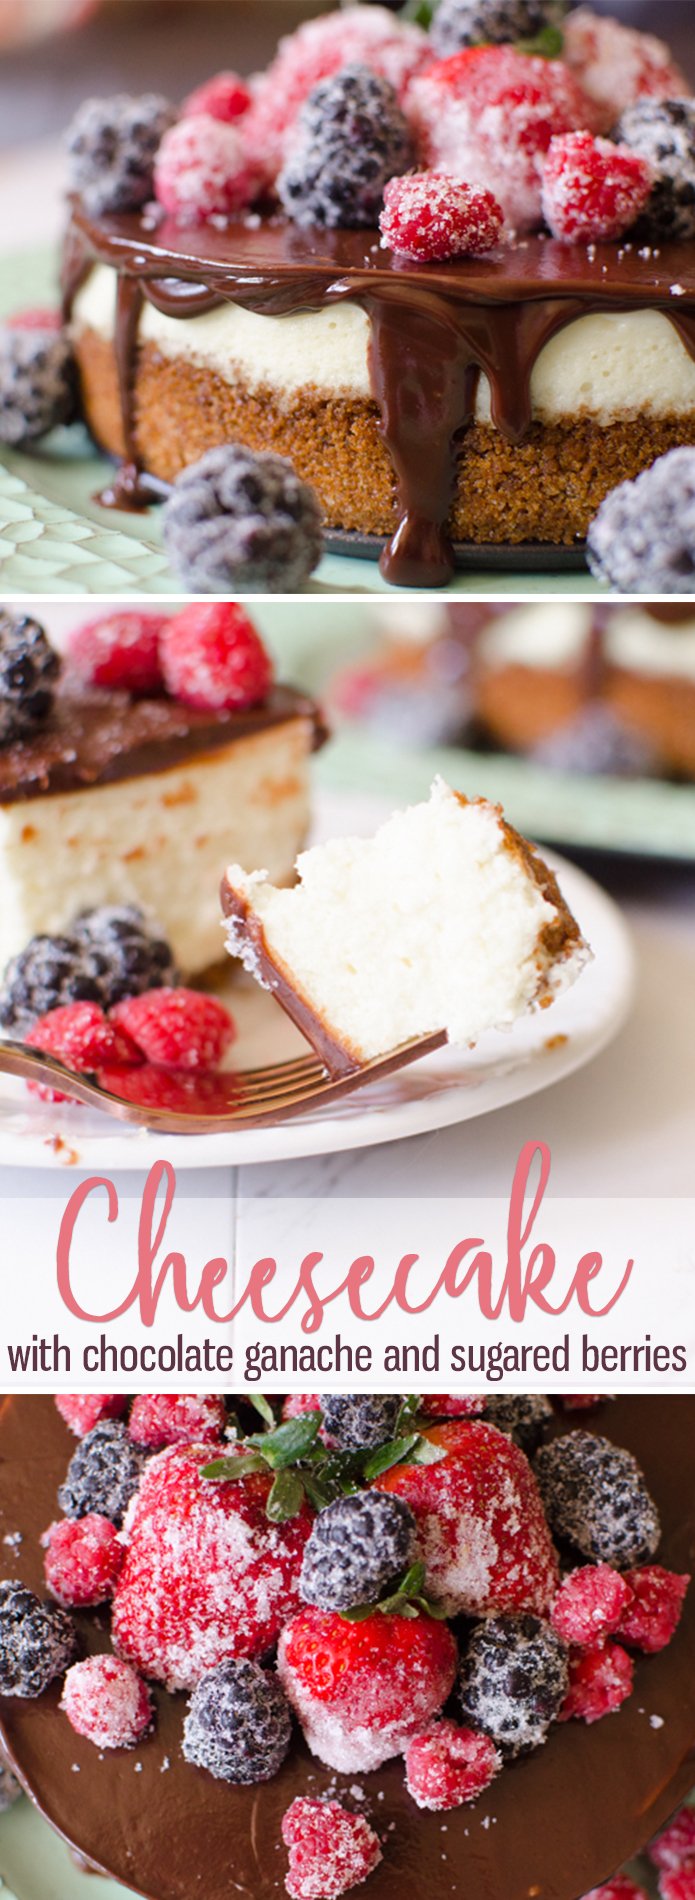 Cheesecake with Berries & Chocolate Ganache is a creamy, homemade, six-inch cheesecake topped with a rich chocolate ganache. The Cheesecake is garnished with sugared berries that give this classic dessert a bright, fresh flavor. #Cheesecake with #Berries and #Ganache from Butter With A Side of Bread #dessert #homemade #howtomakecheesecake #food #recipe